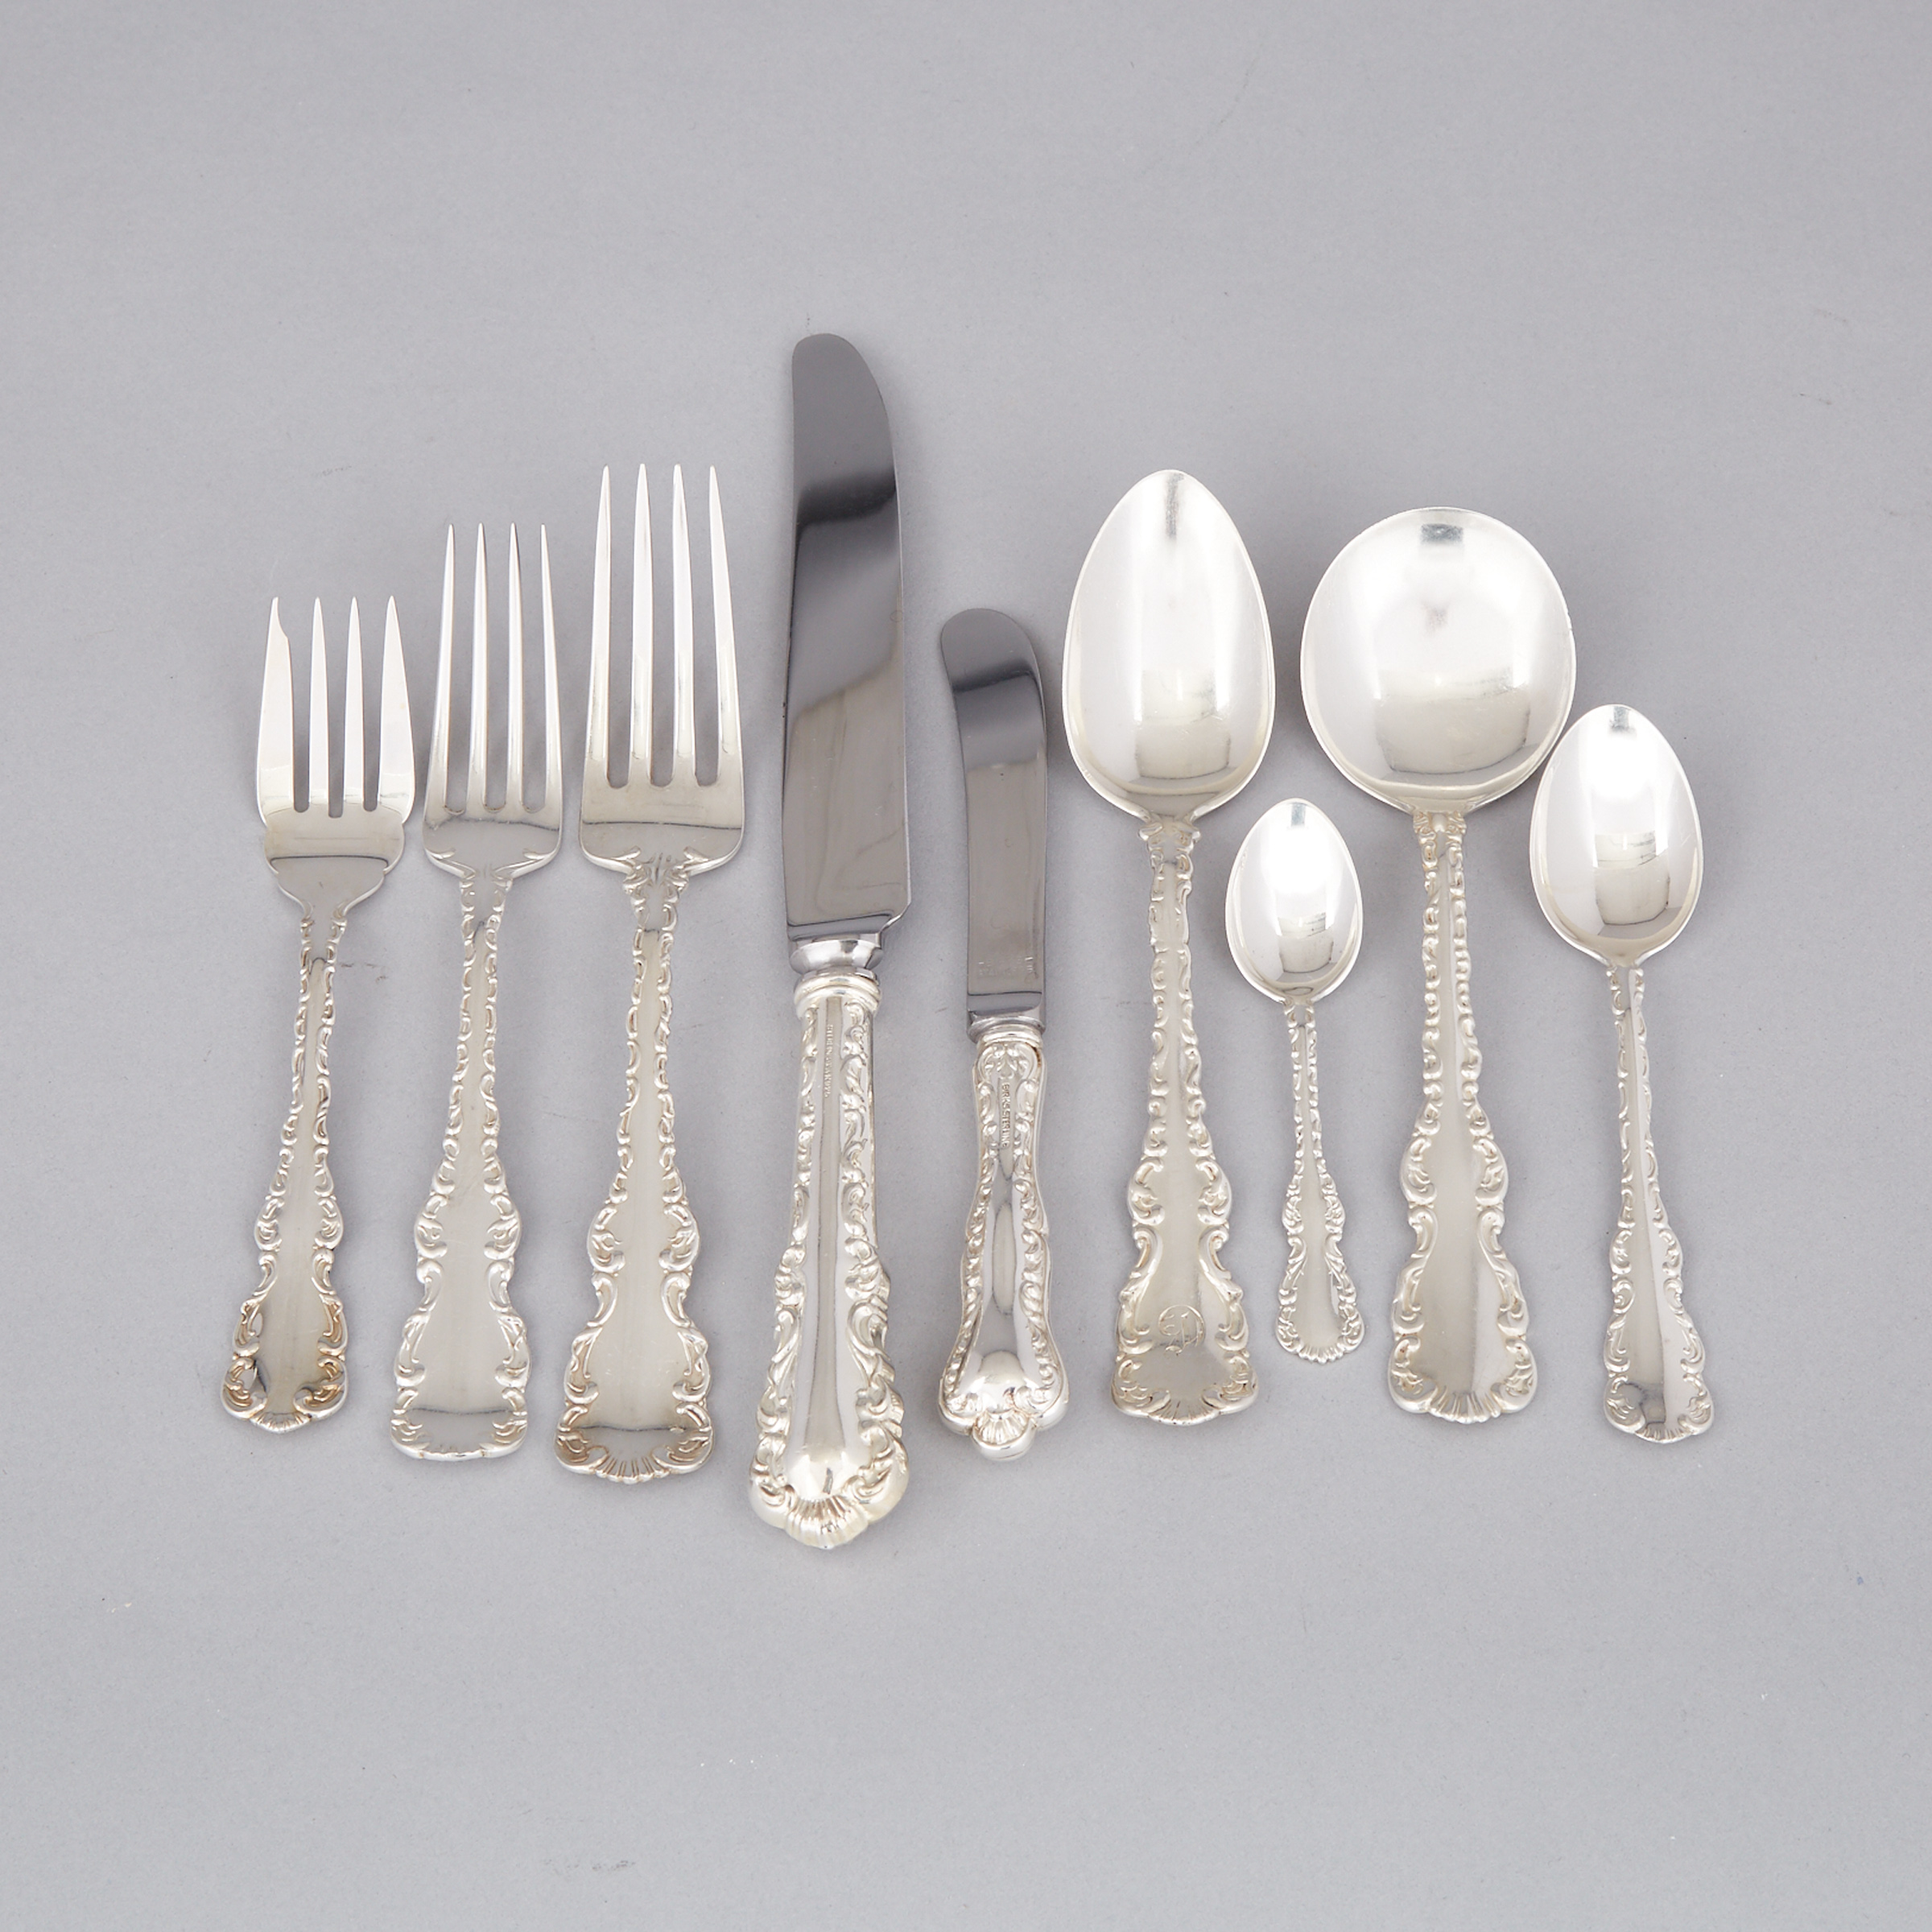 Group of Mainly Canadian Silver ‘Louis XV’ Pattern Flatware, Henry Birks & Sons, Gorham Mfg. Co. and Roden Brothers, 20th century